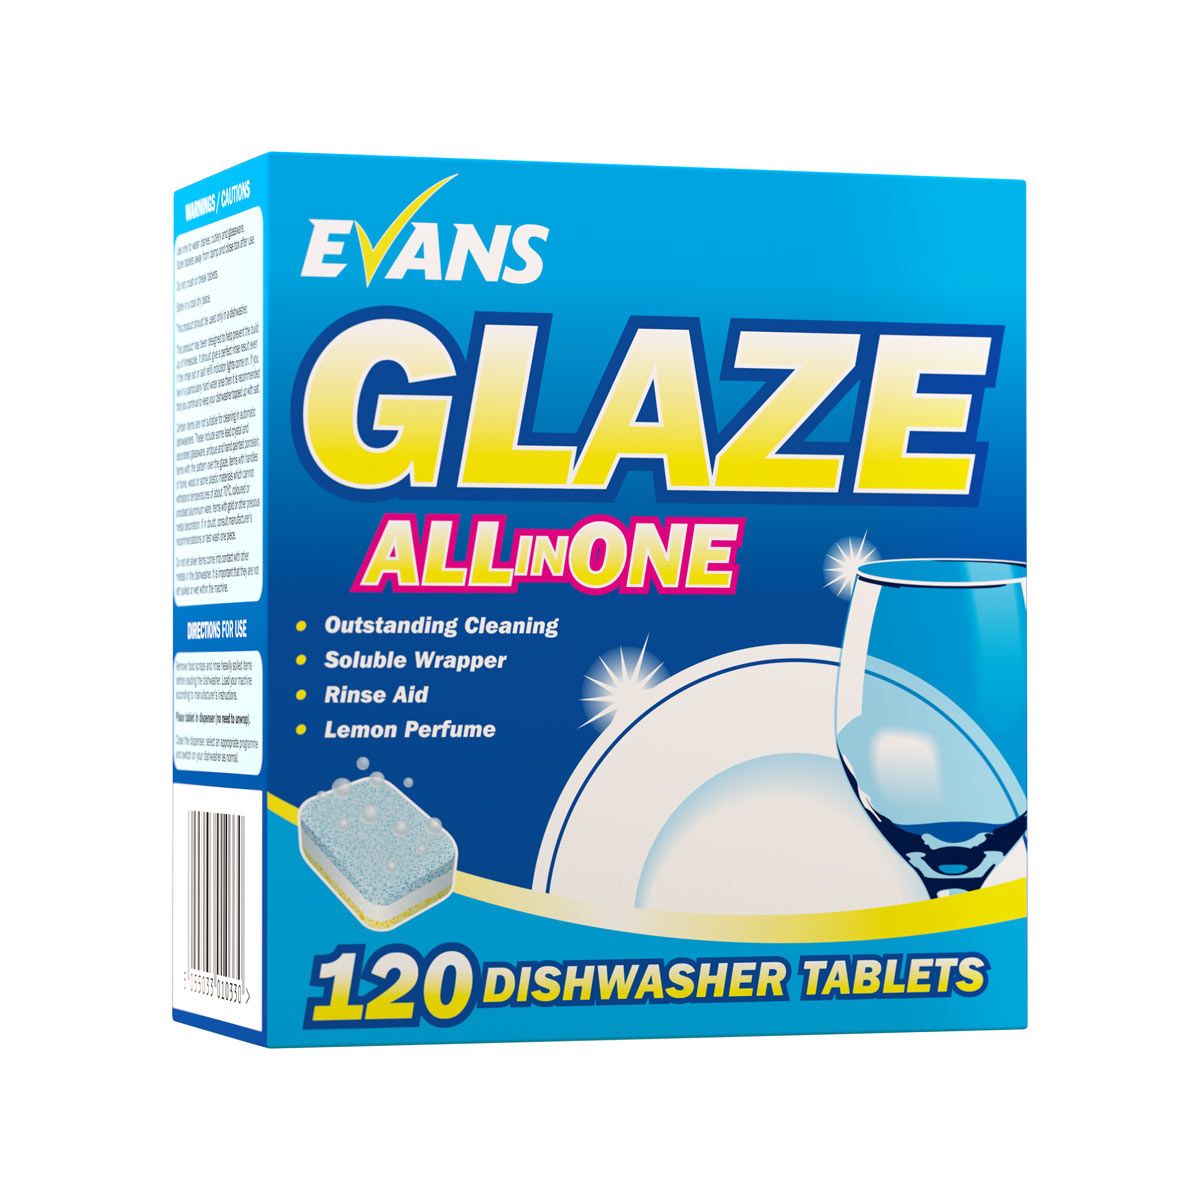 Glaze All in One - Dishwasher Tablets